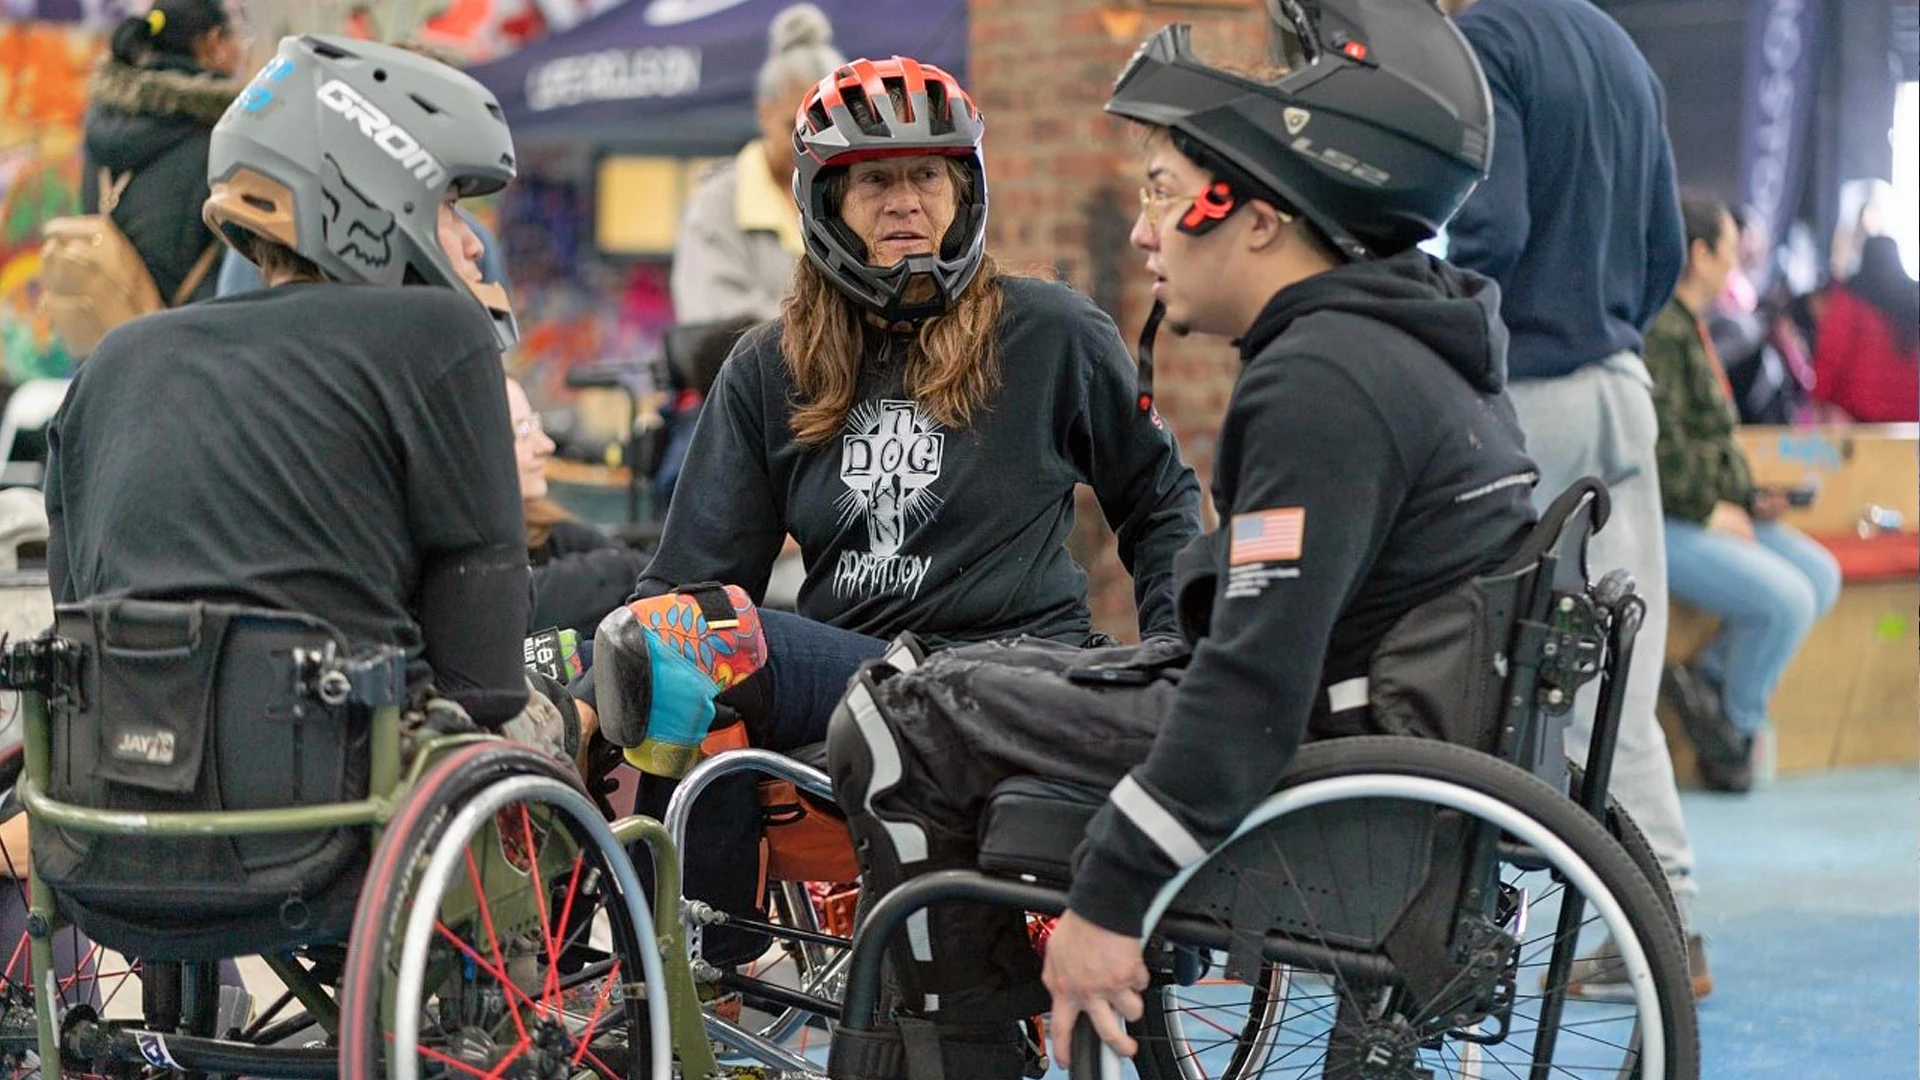 Programming have grown to a wide variety, including meditation sessions, group counseling and therapy, and even home-based and aerobic training. Pictured is a Mount Sinai WCMX event, a sport in which wheelchair athletes perform tricks adapted from skateboarding and BMX.